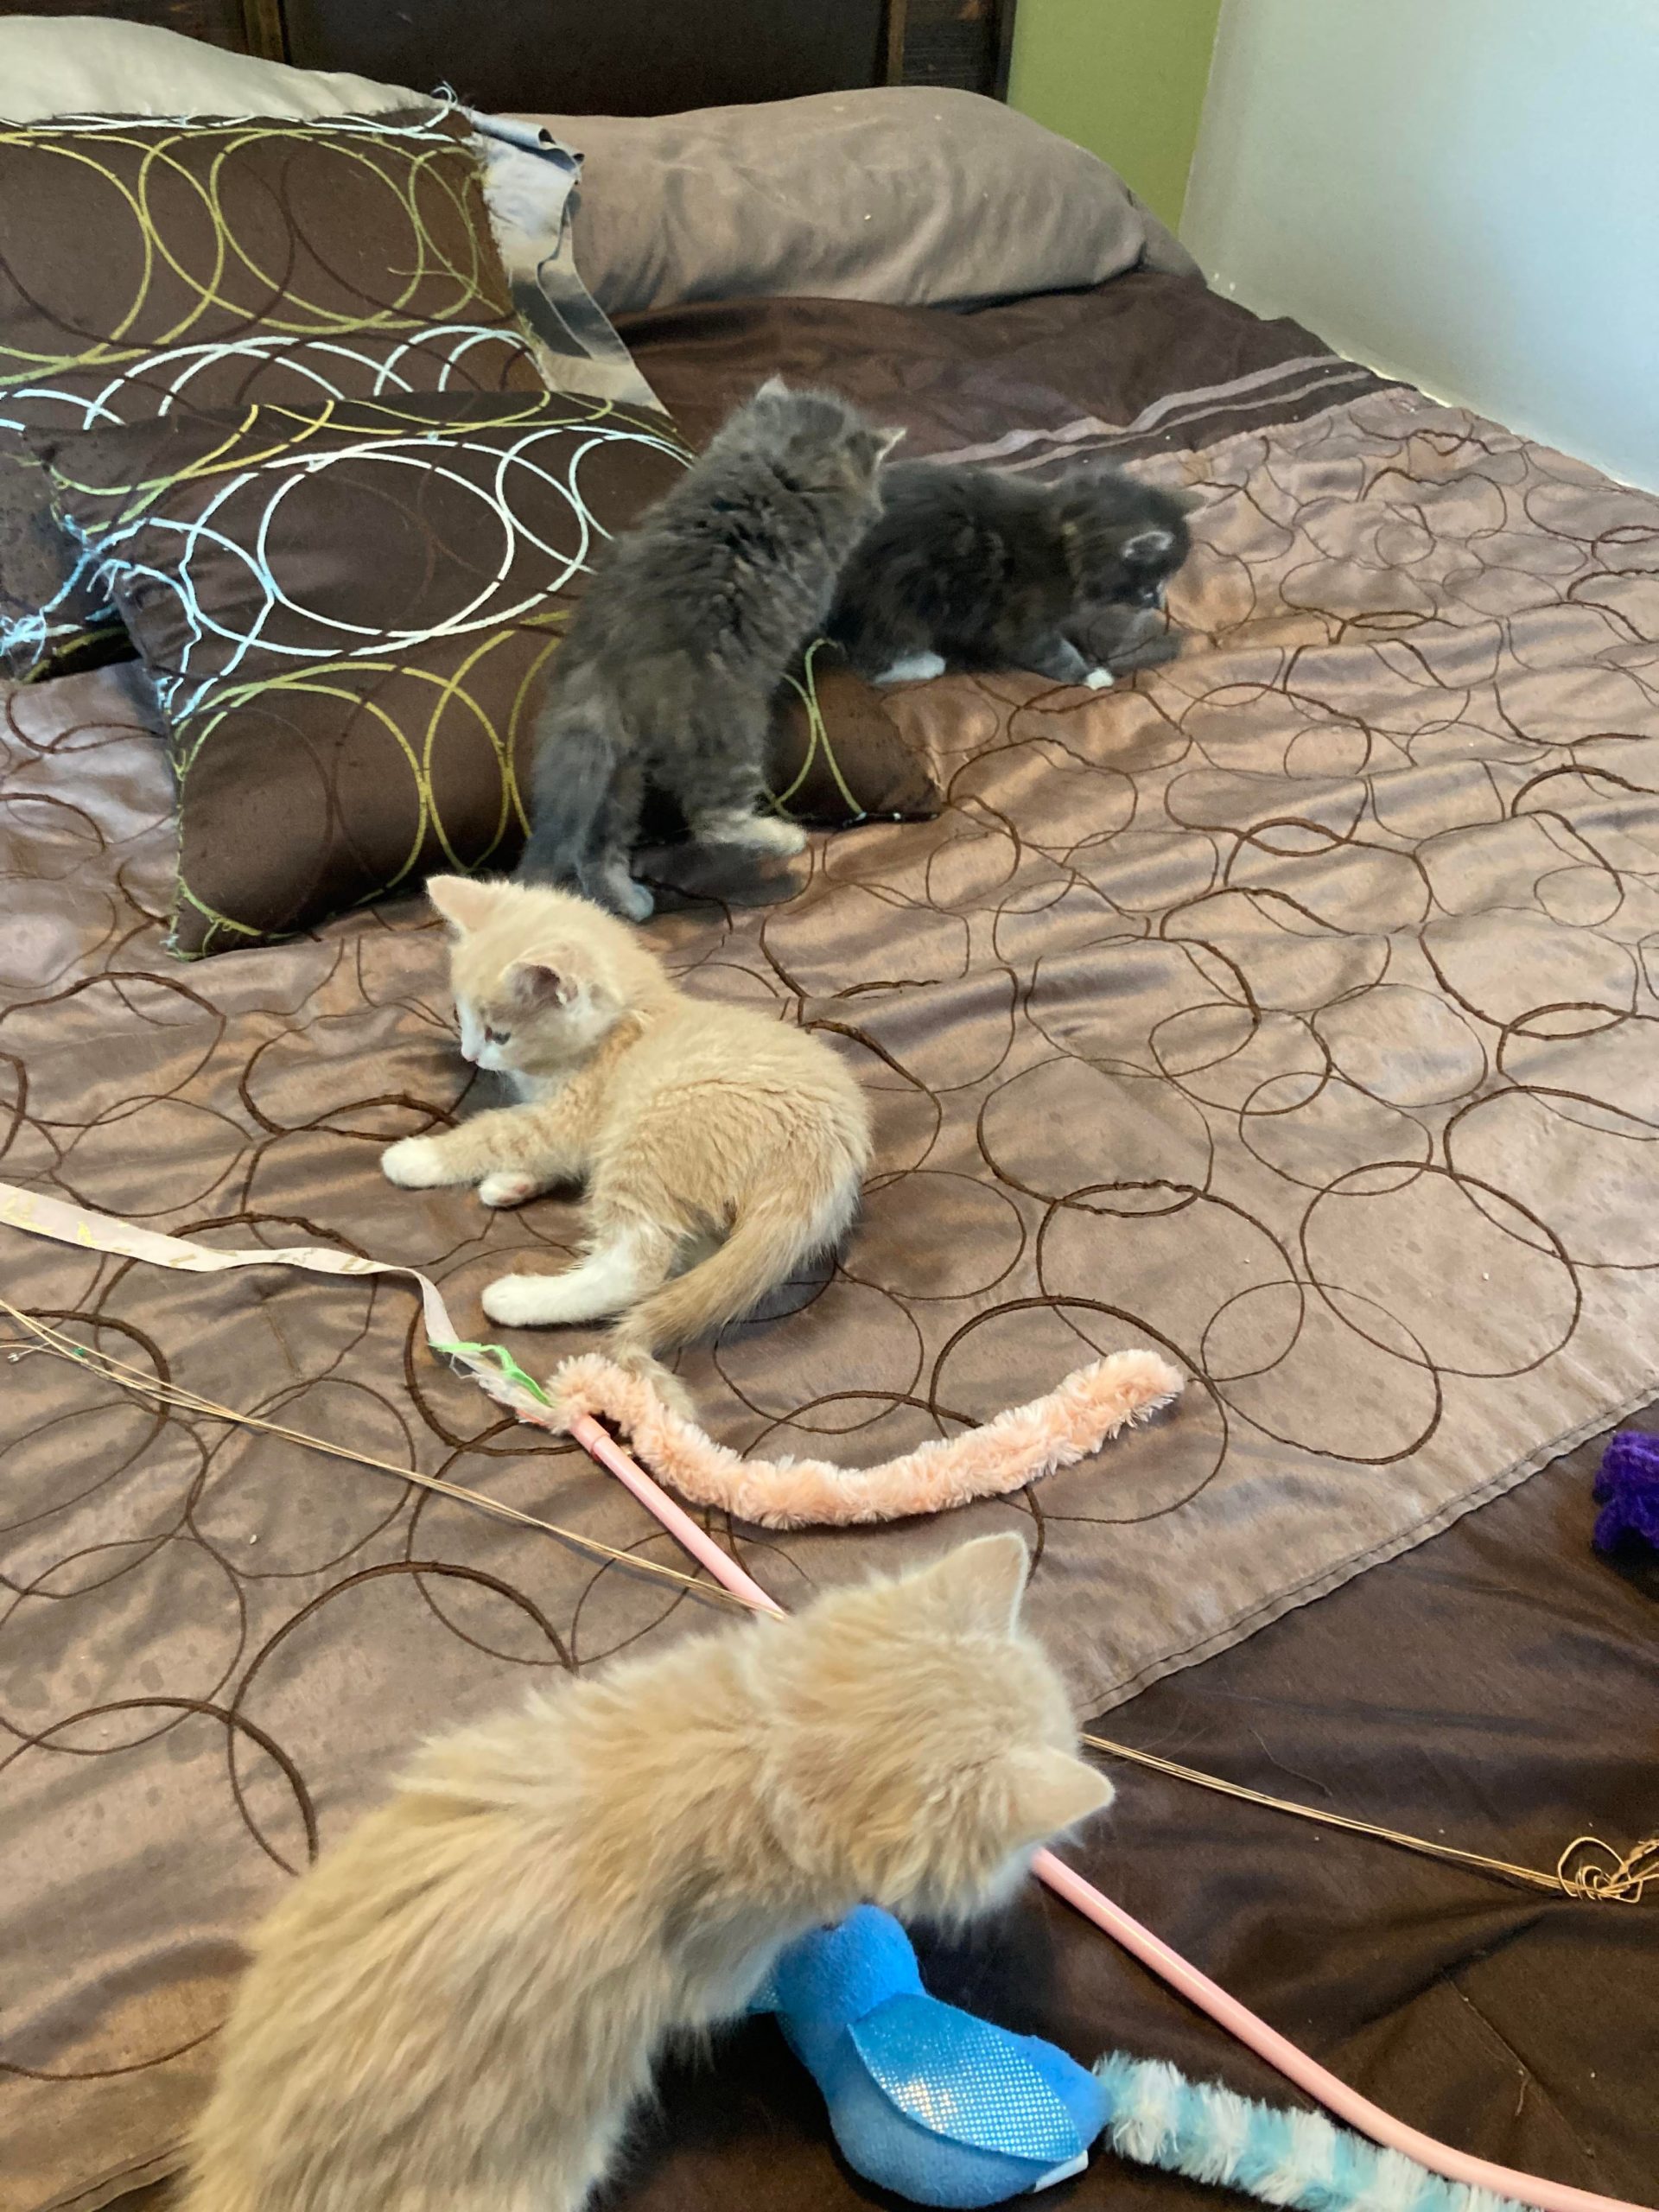 Four kittens play with toys on the floor of a home.